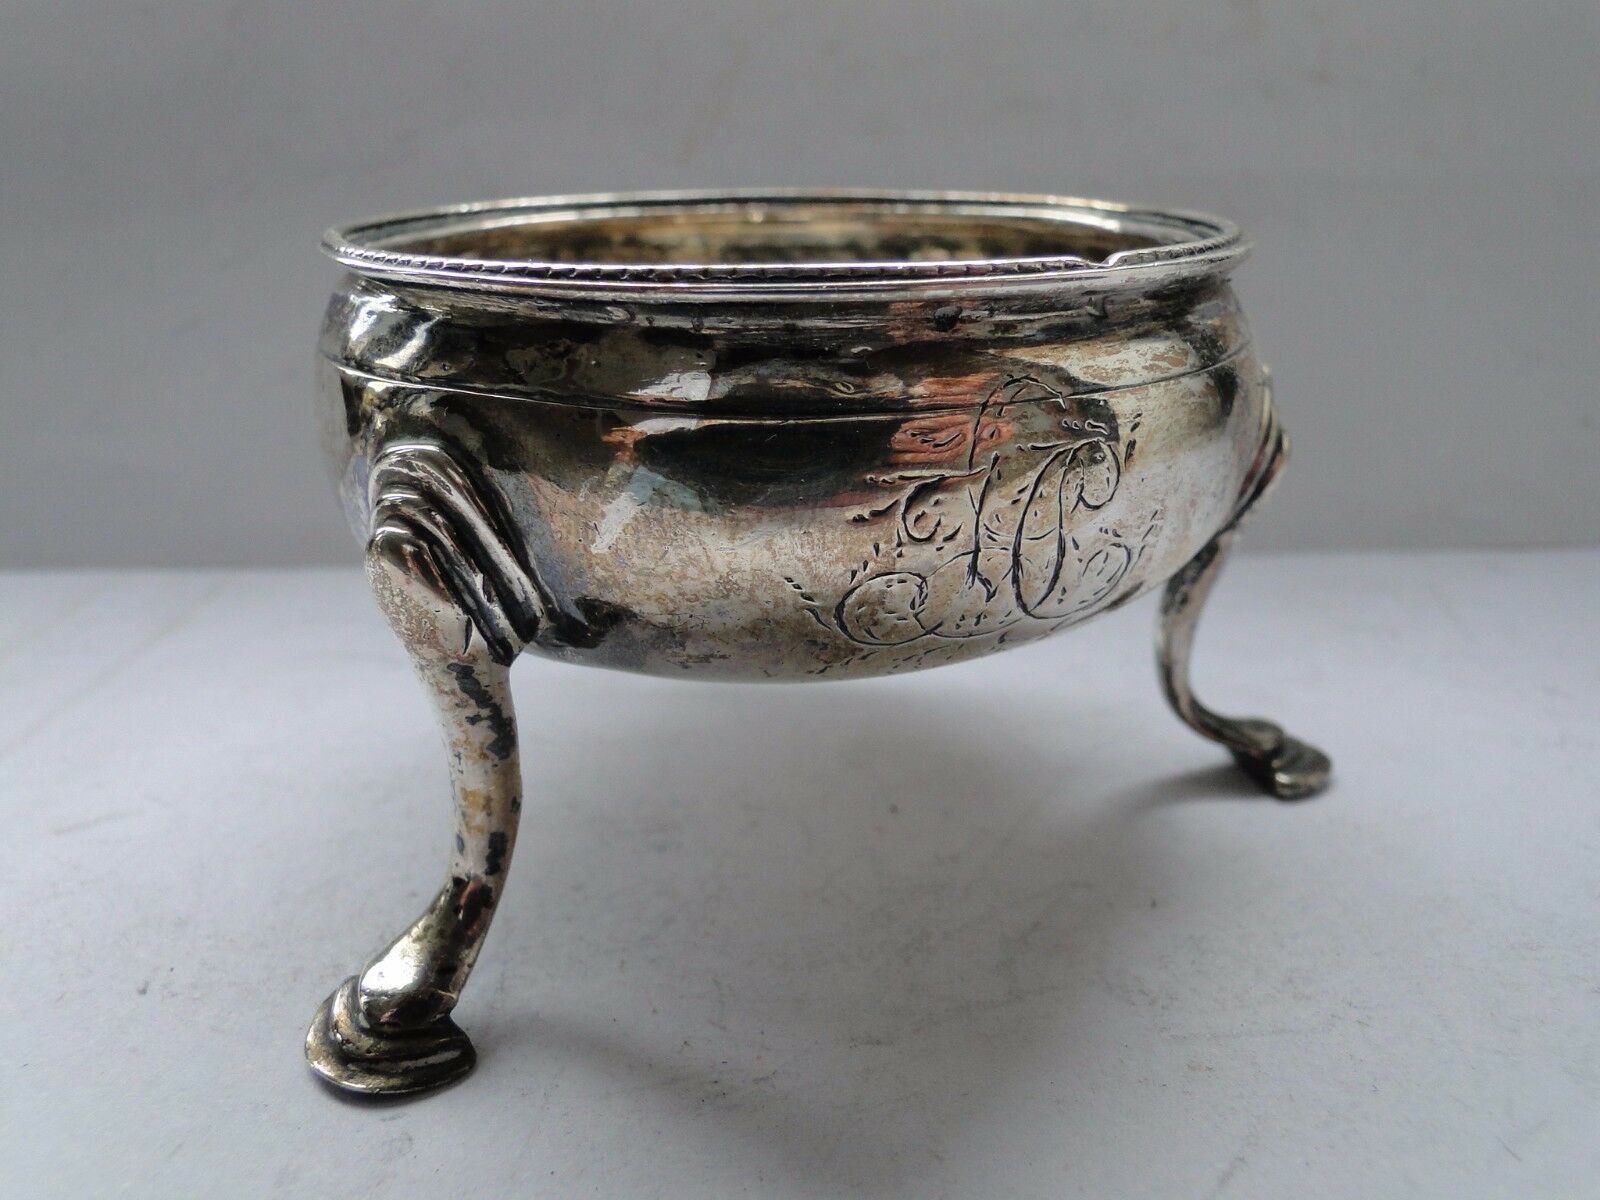 MINIATURE DISH ON THREE FEET, STERLING SILVER LONDON 1829, DOLL HOUSE ACCESSORY